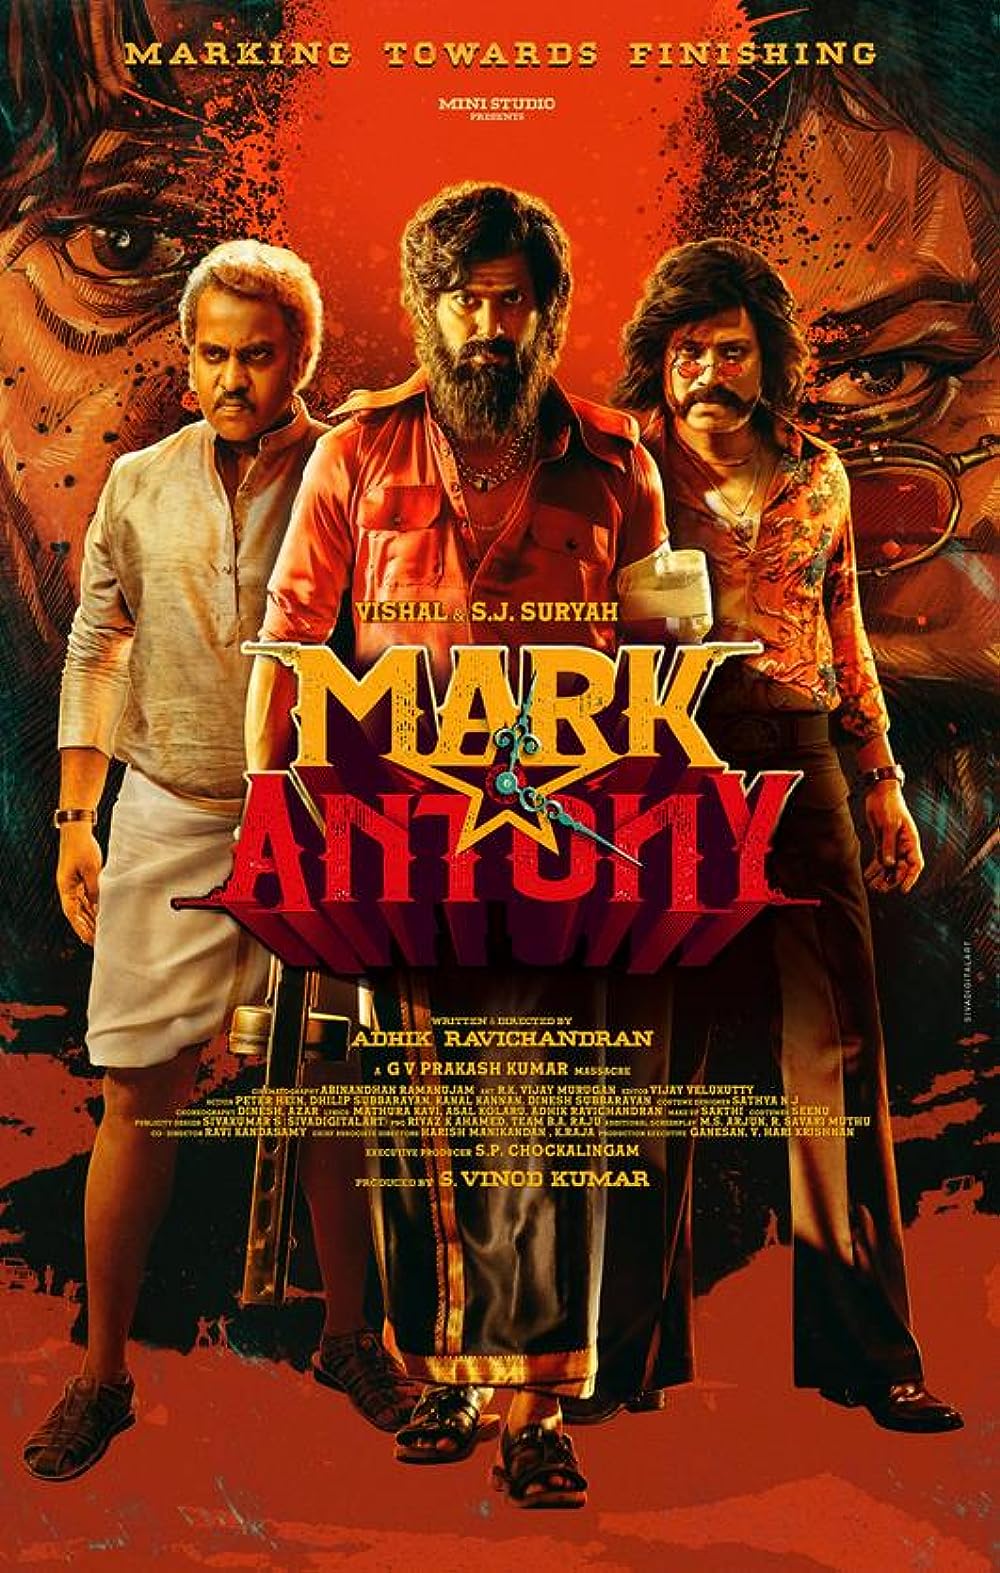 Mark Antony (October 13) - Prime Video
Mark Antony is a Tamil Sci-fi thriller where Vishal, finds a telephone through which he is able to communicate with people in the past and potentially alter the happenings that would gravely affect the present and future of everyone.